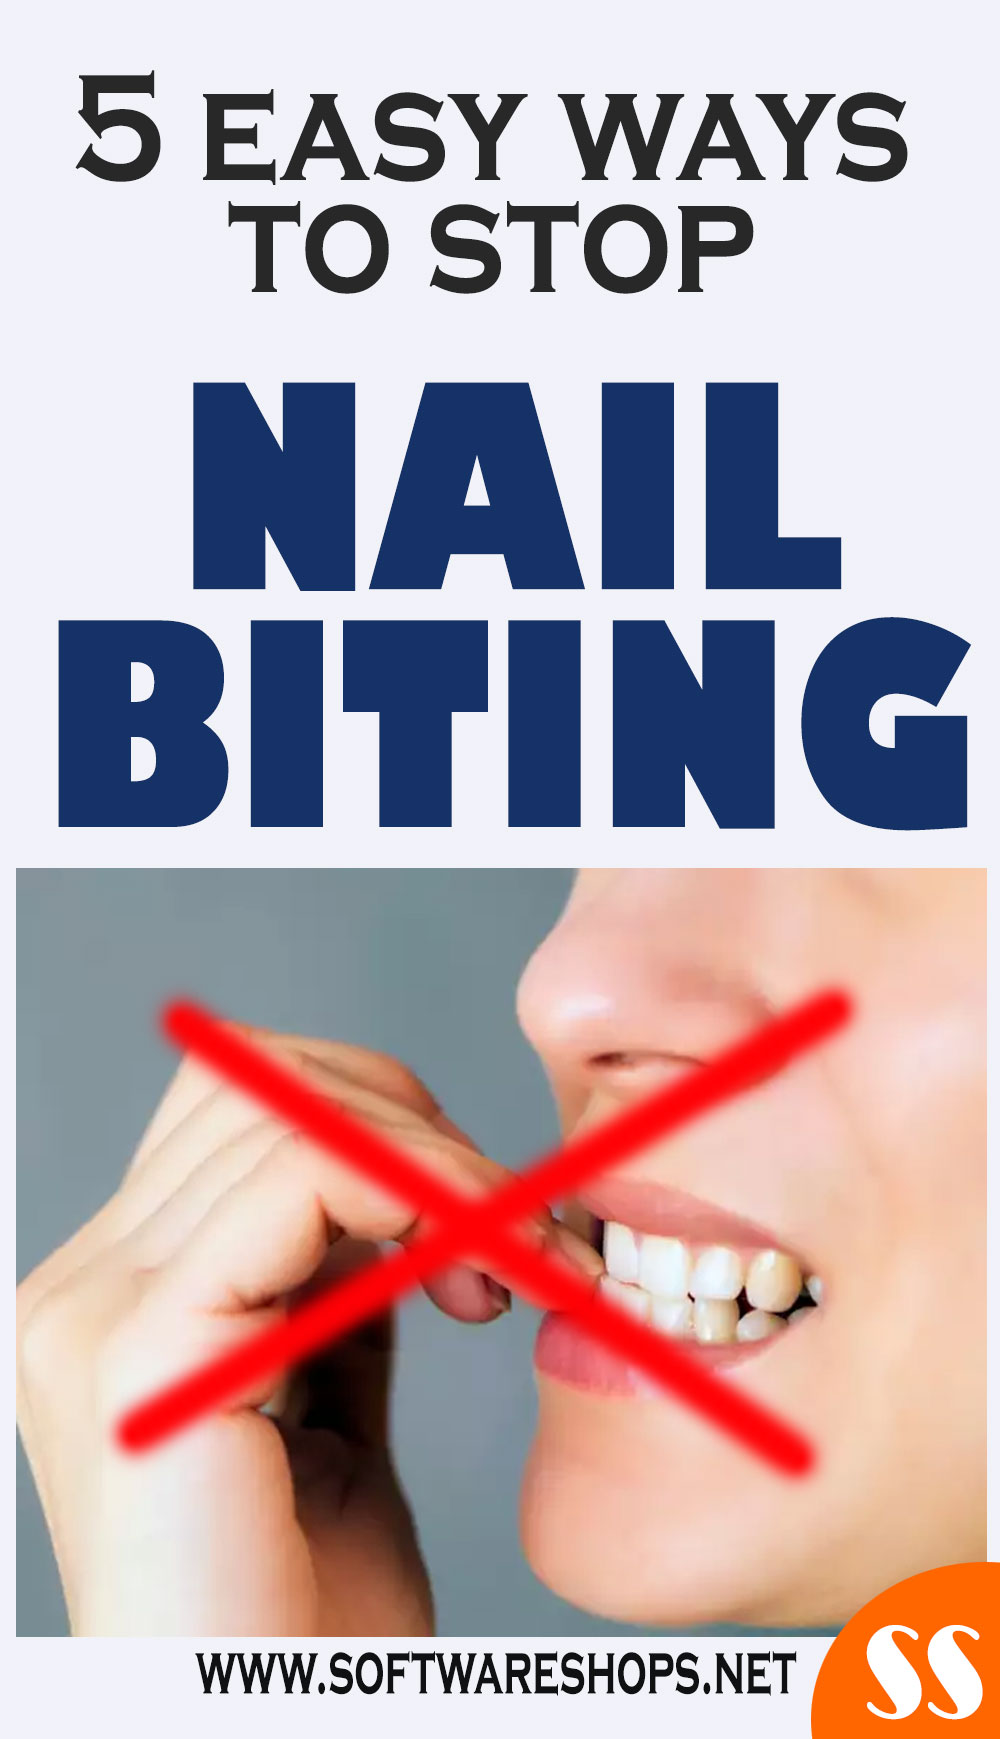 5 easy ways to stop nail biting